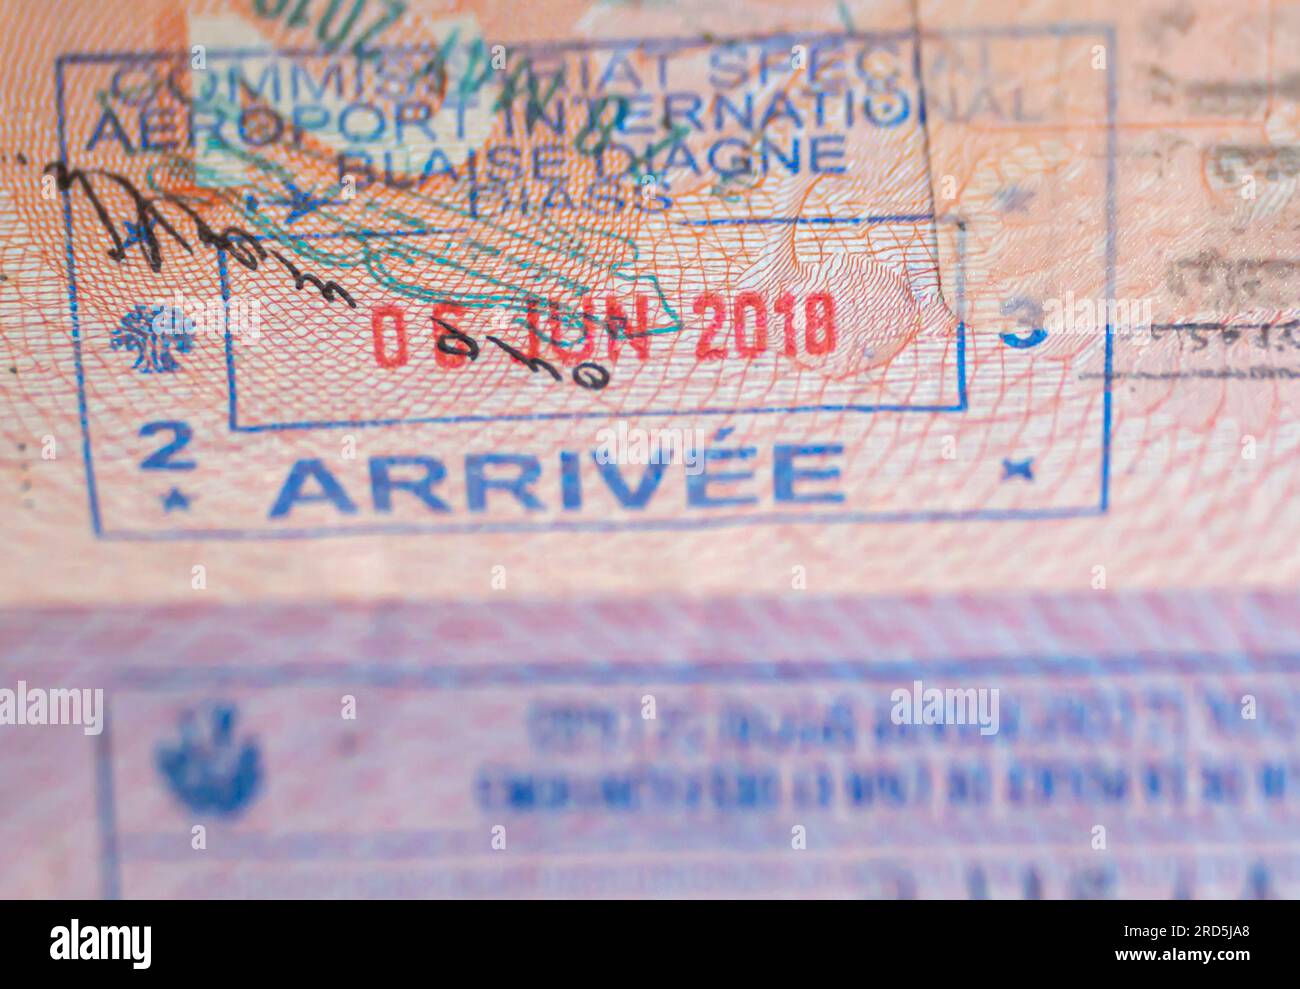 Senegal entry visa stamp in an open passport with point of arrival Aéroport de Dakar, Blaise Diagne International Airport. Senegal entry stamp. Stock Photo